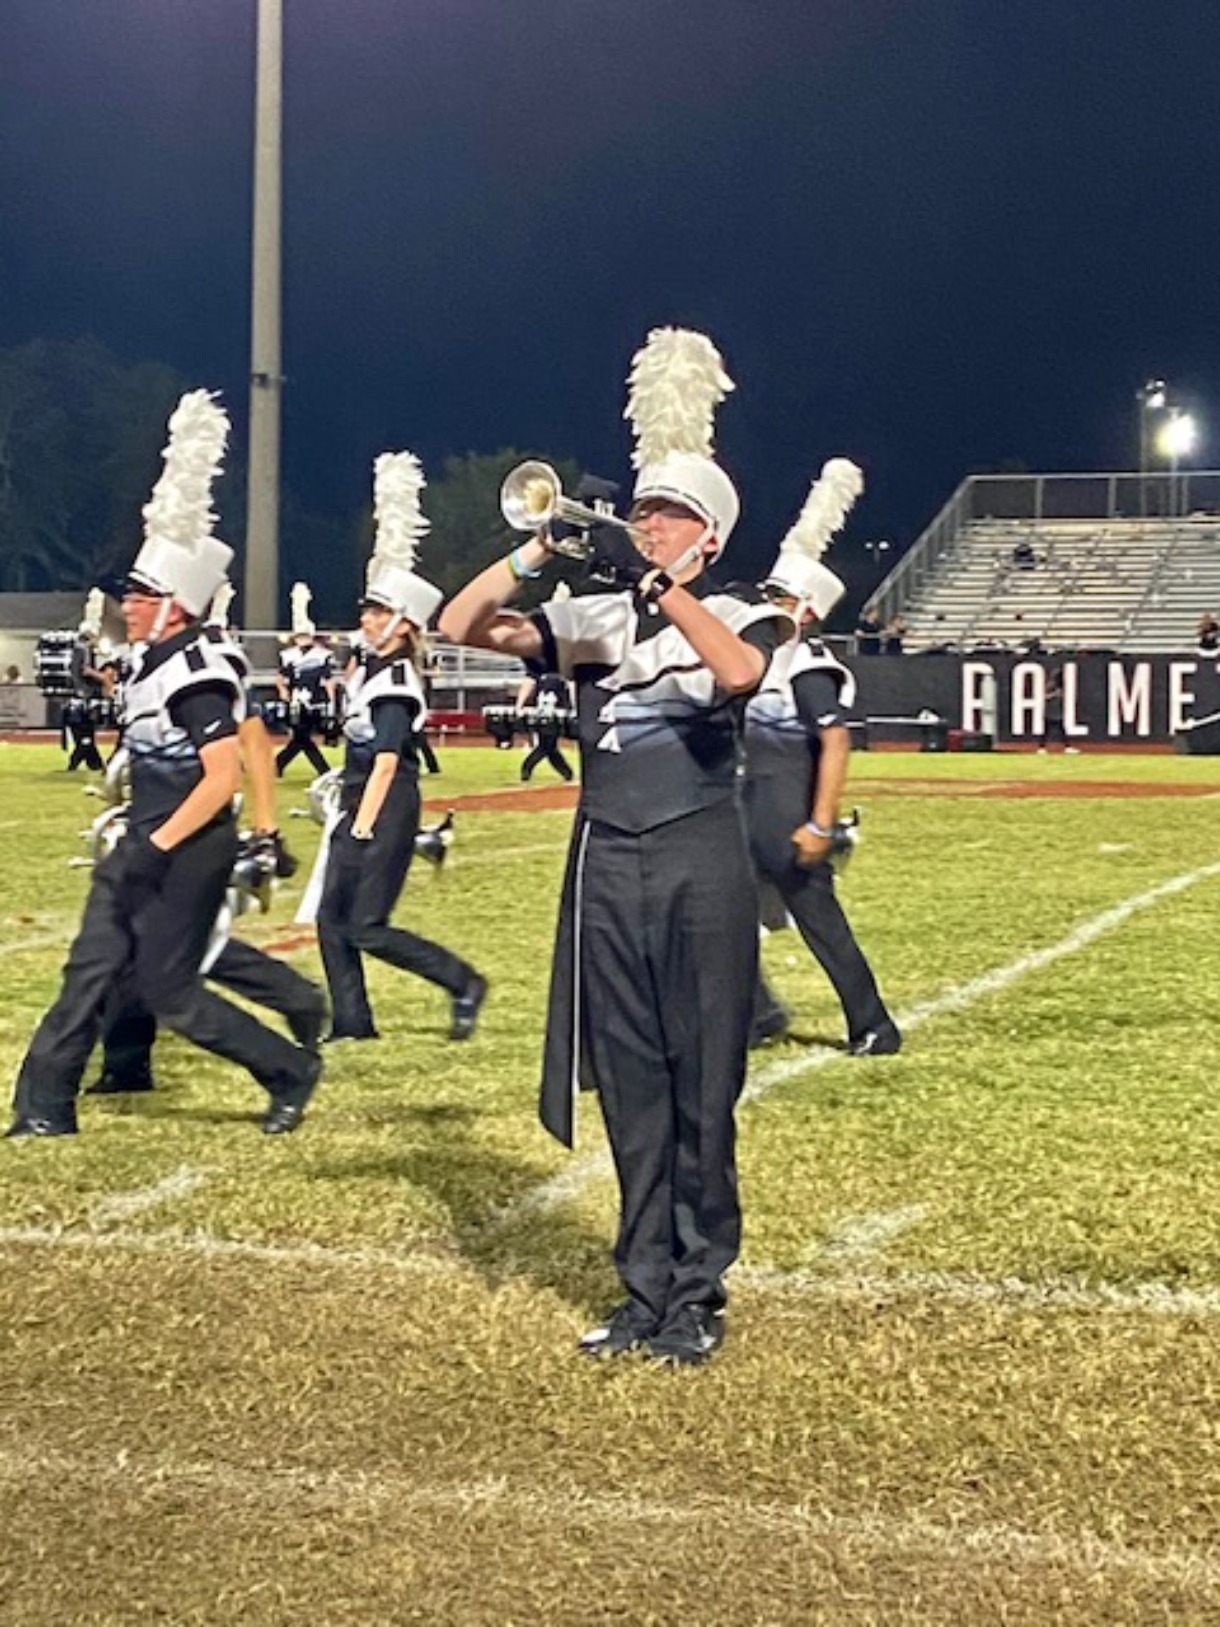 Robert Powers, a trumpet player, and the rest of the Lakewood Ranch High School Marching Mustangs will compete against 18 other bands, including Braden River High, at the state championships. (Courtesy photo)